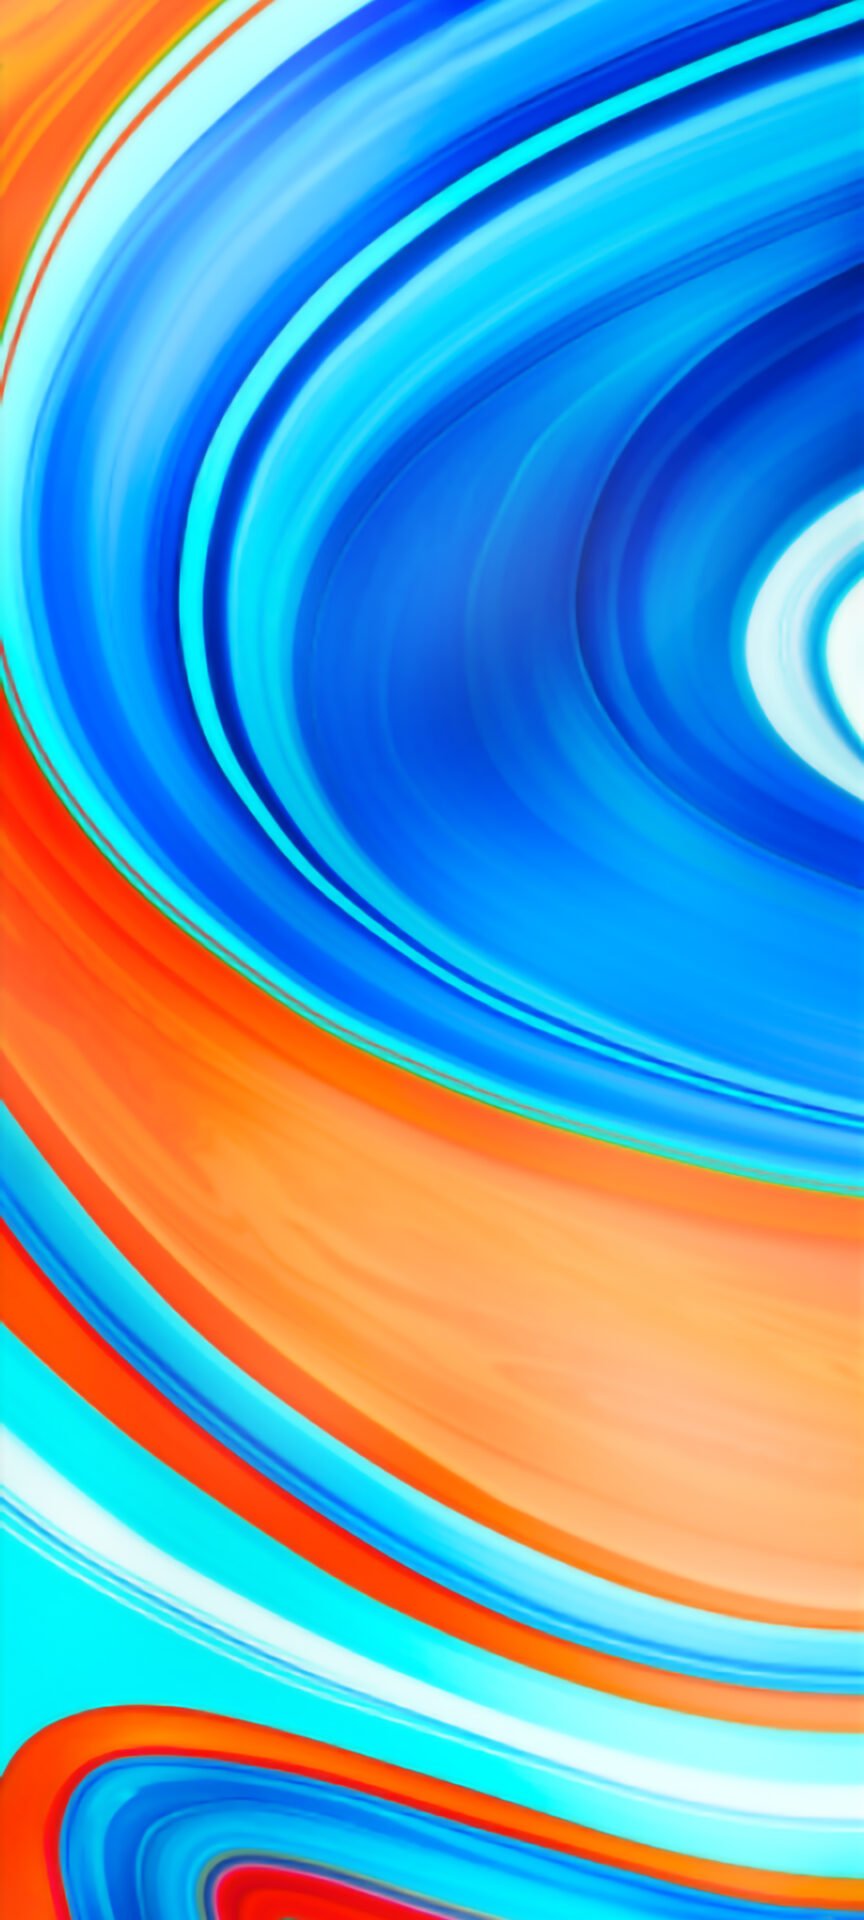 Redmi Note 9 Series Wallpaper Stock your phone colorful